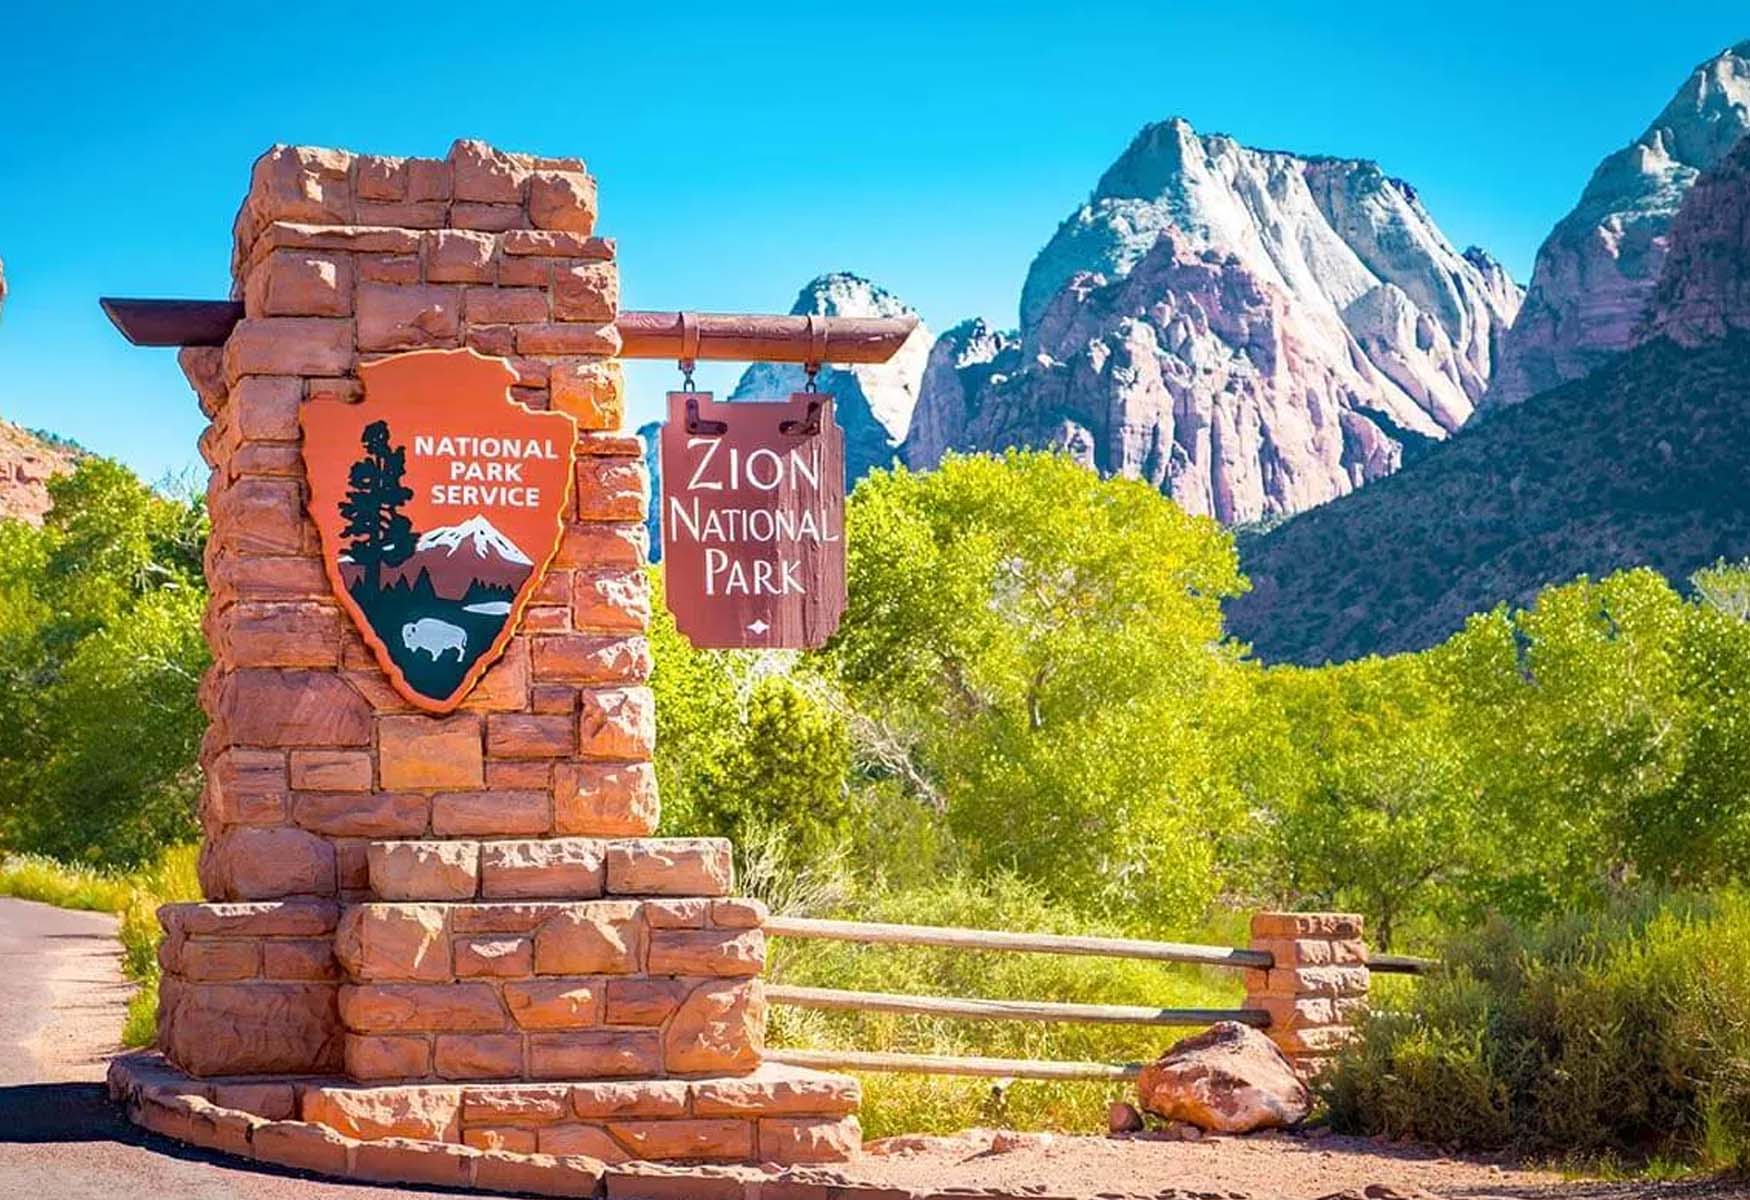 Where To Stay In Zion National Park (TOP 5 Areas)